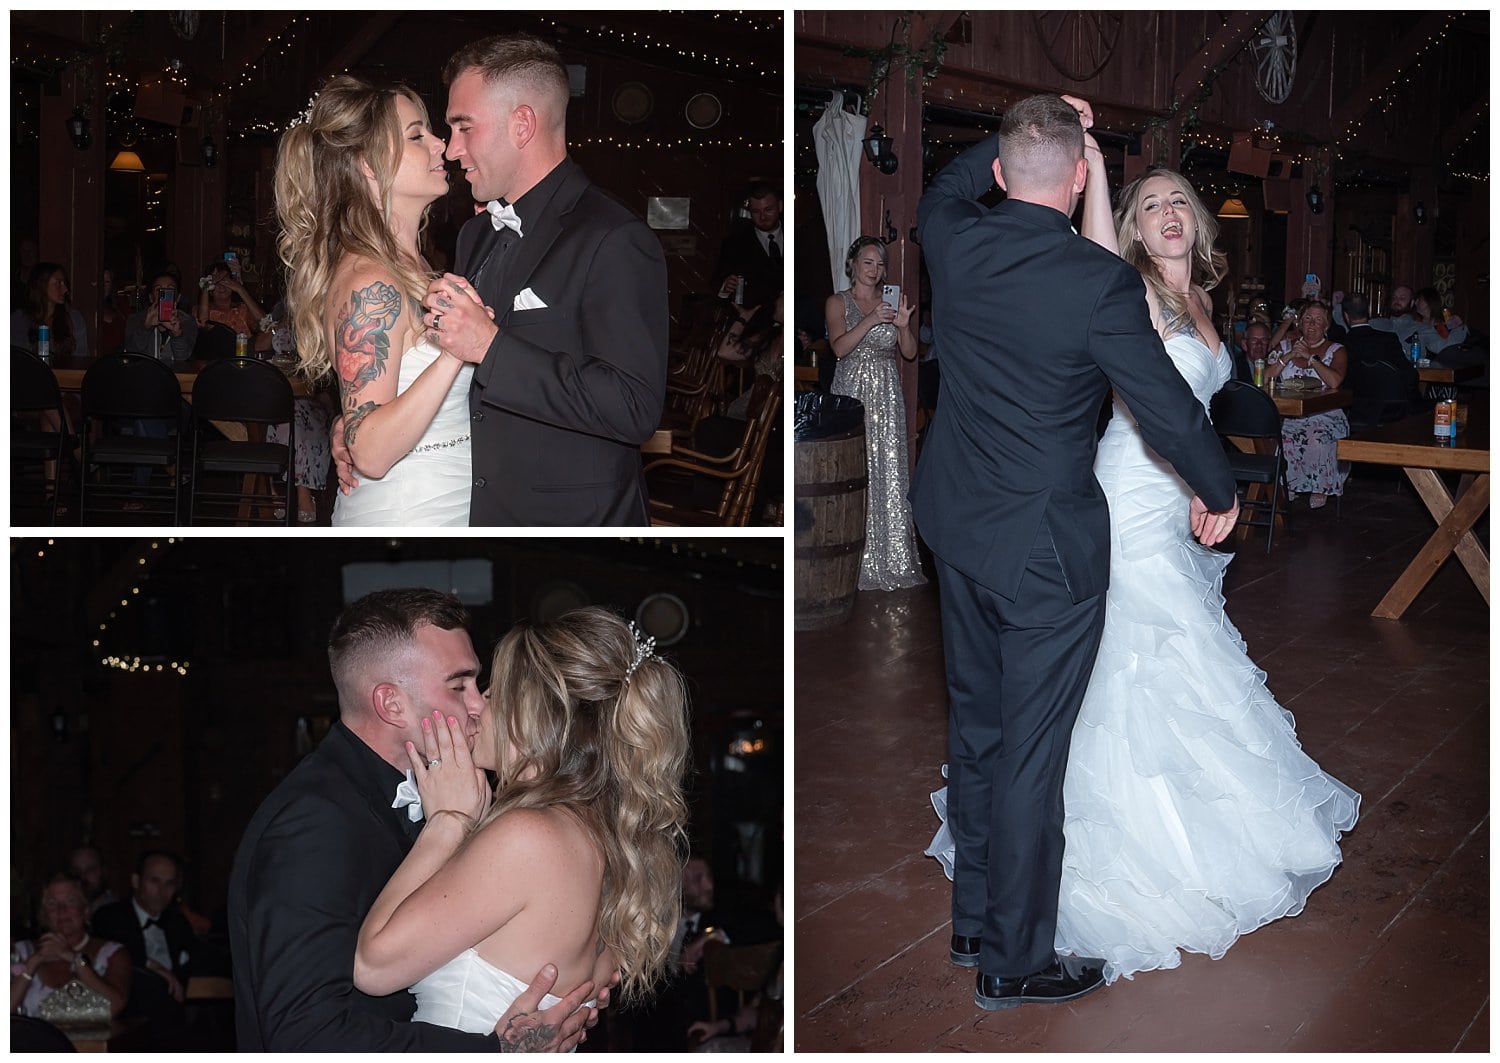 The bride and groom have their first dance during their wedding reception at Hatfield Farm in Halifax.